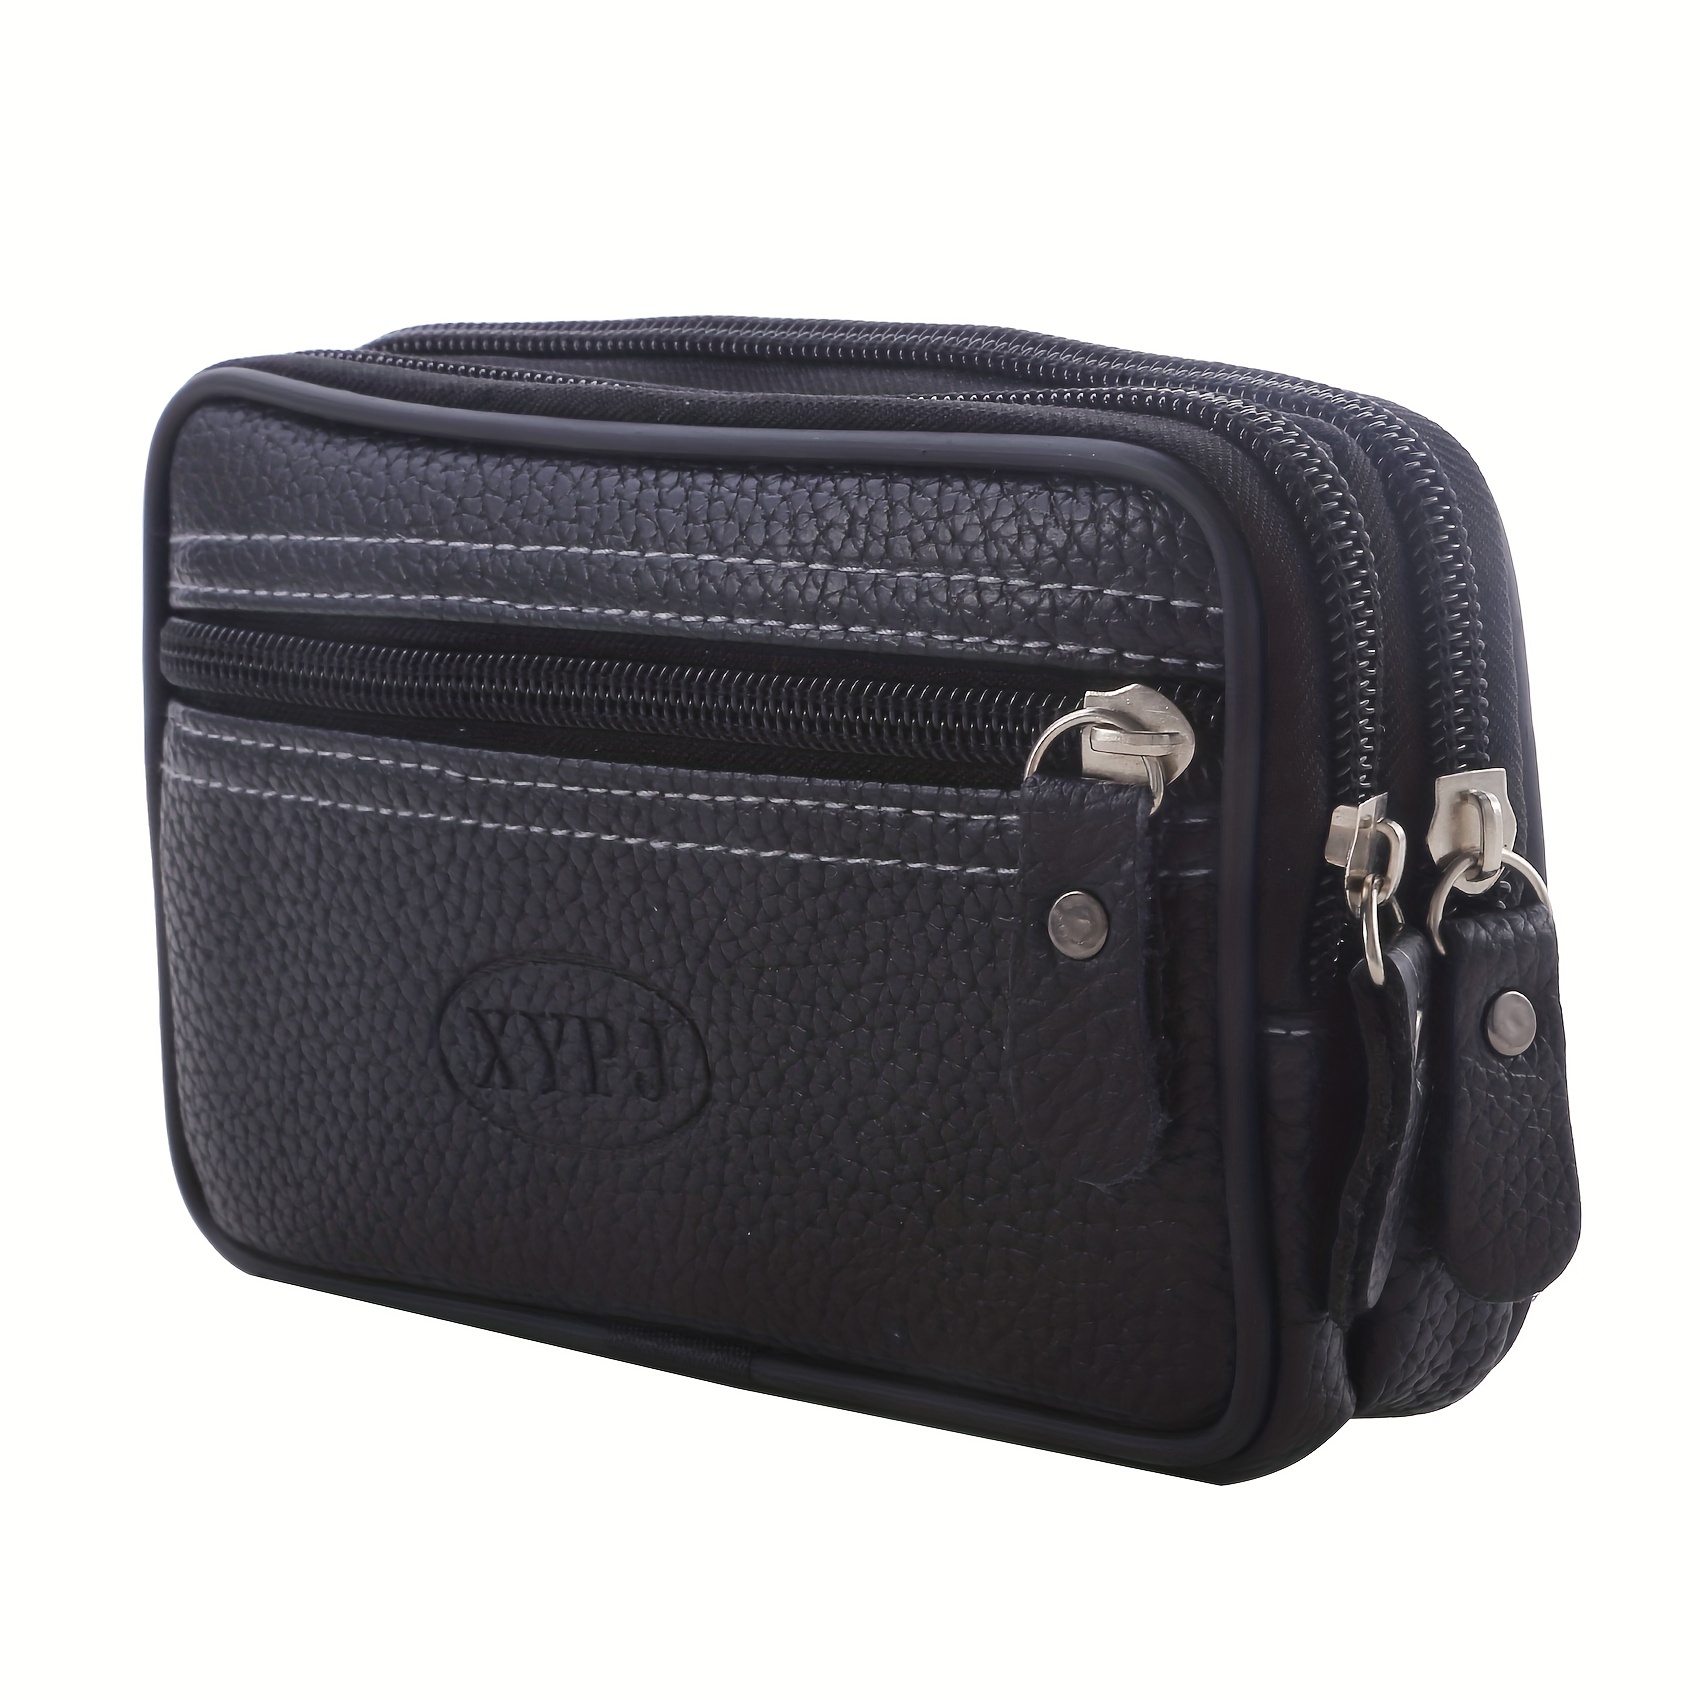 1pc Men's Zipper Leather Waist Bag with Multifunctional Double Layer Soft Leather Design